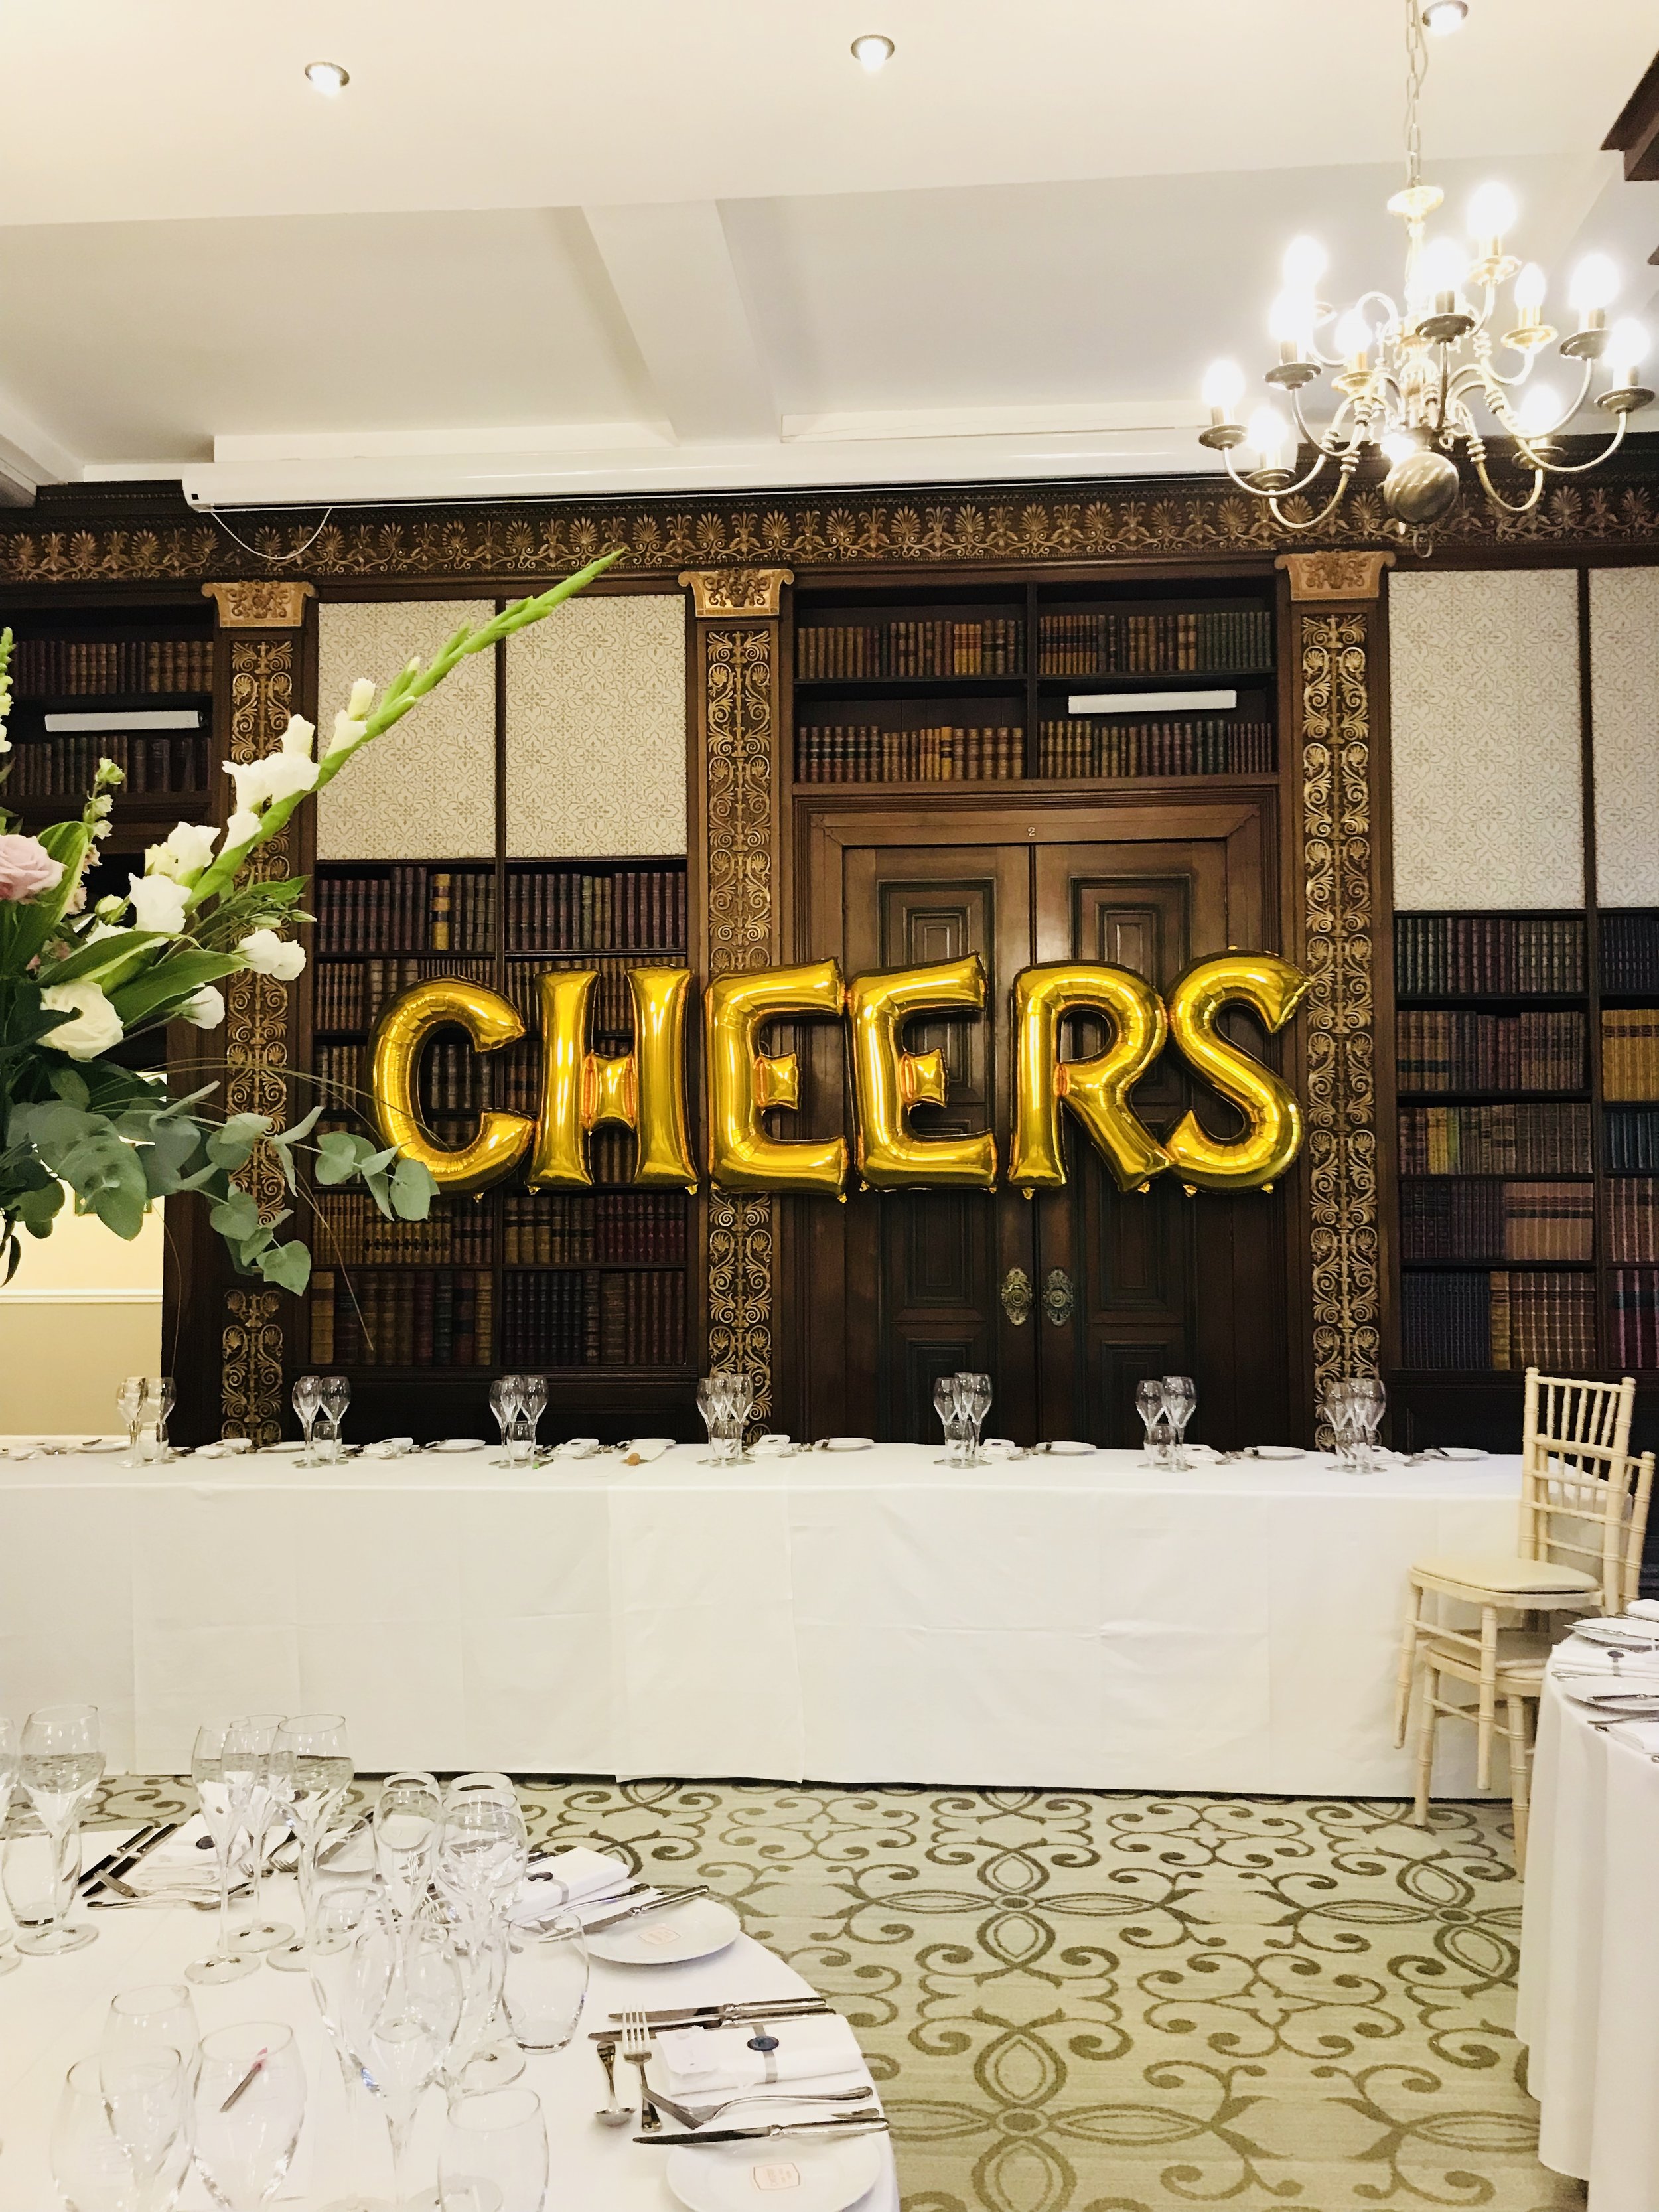 Cheers Letter Balloon Display